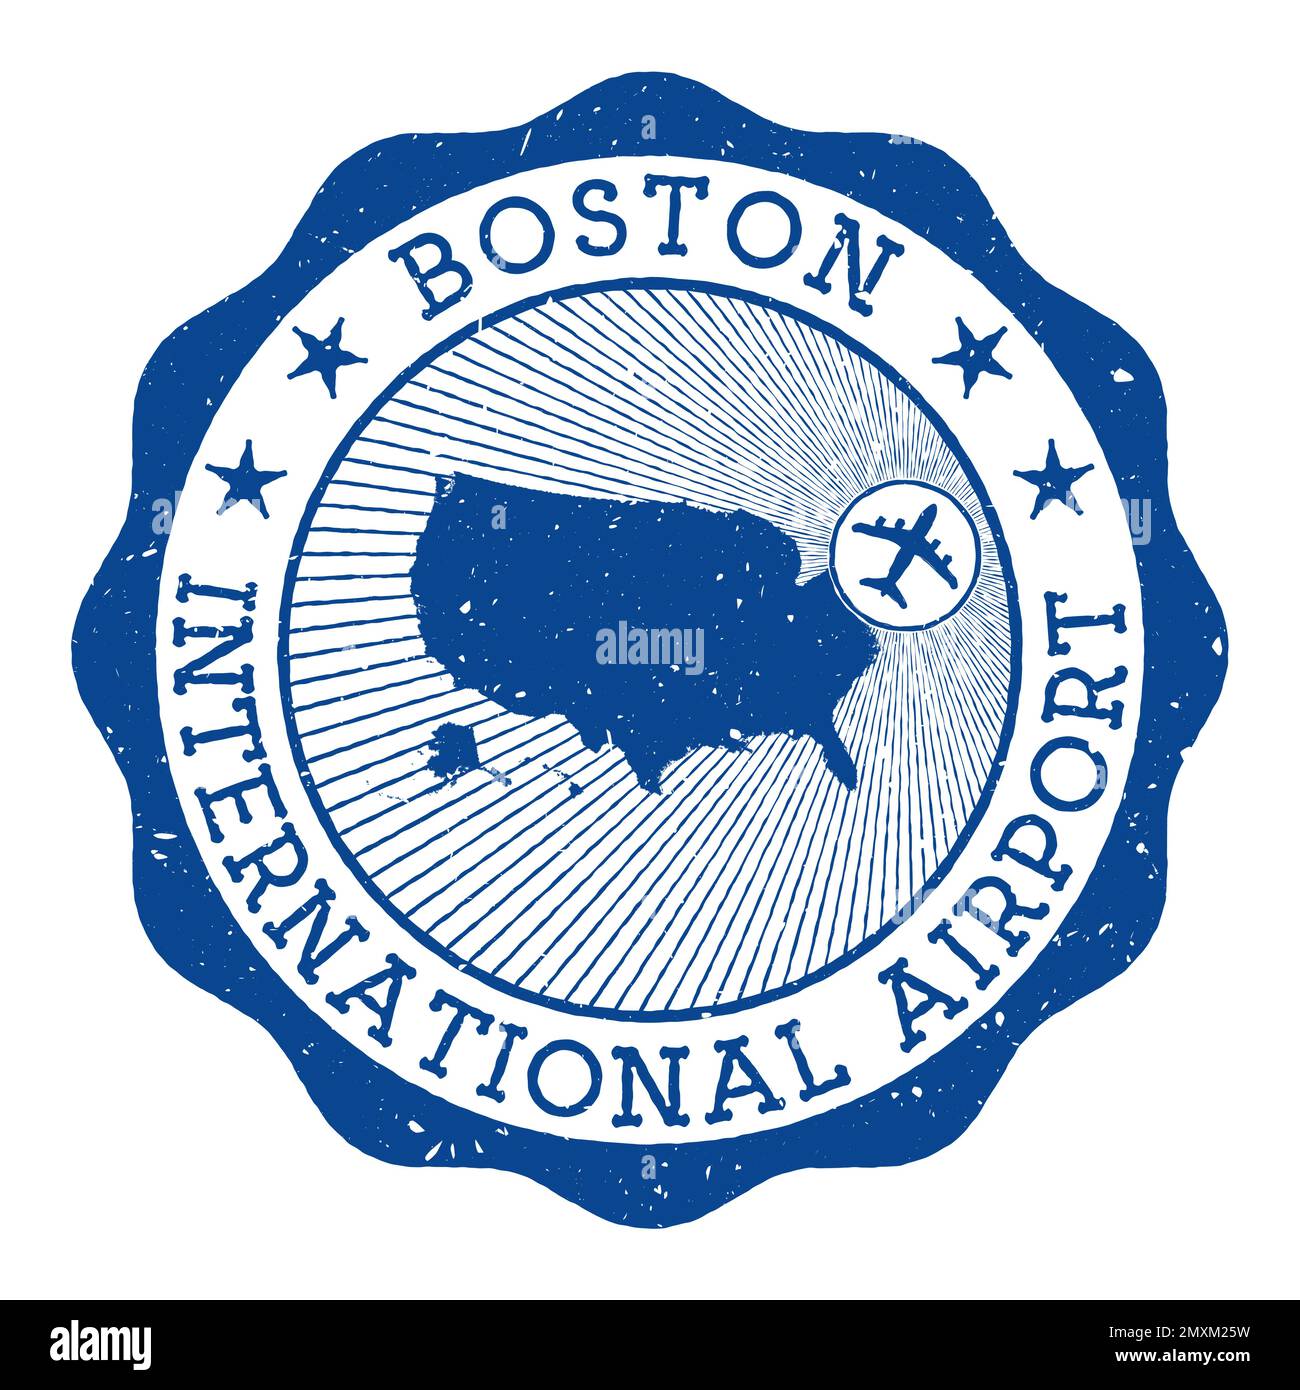 Boston International Airport stamp. Airport of Boston round logo with location on United States map marked by airplane. Vector illustration. Stock Vector